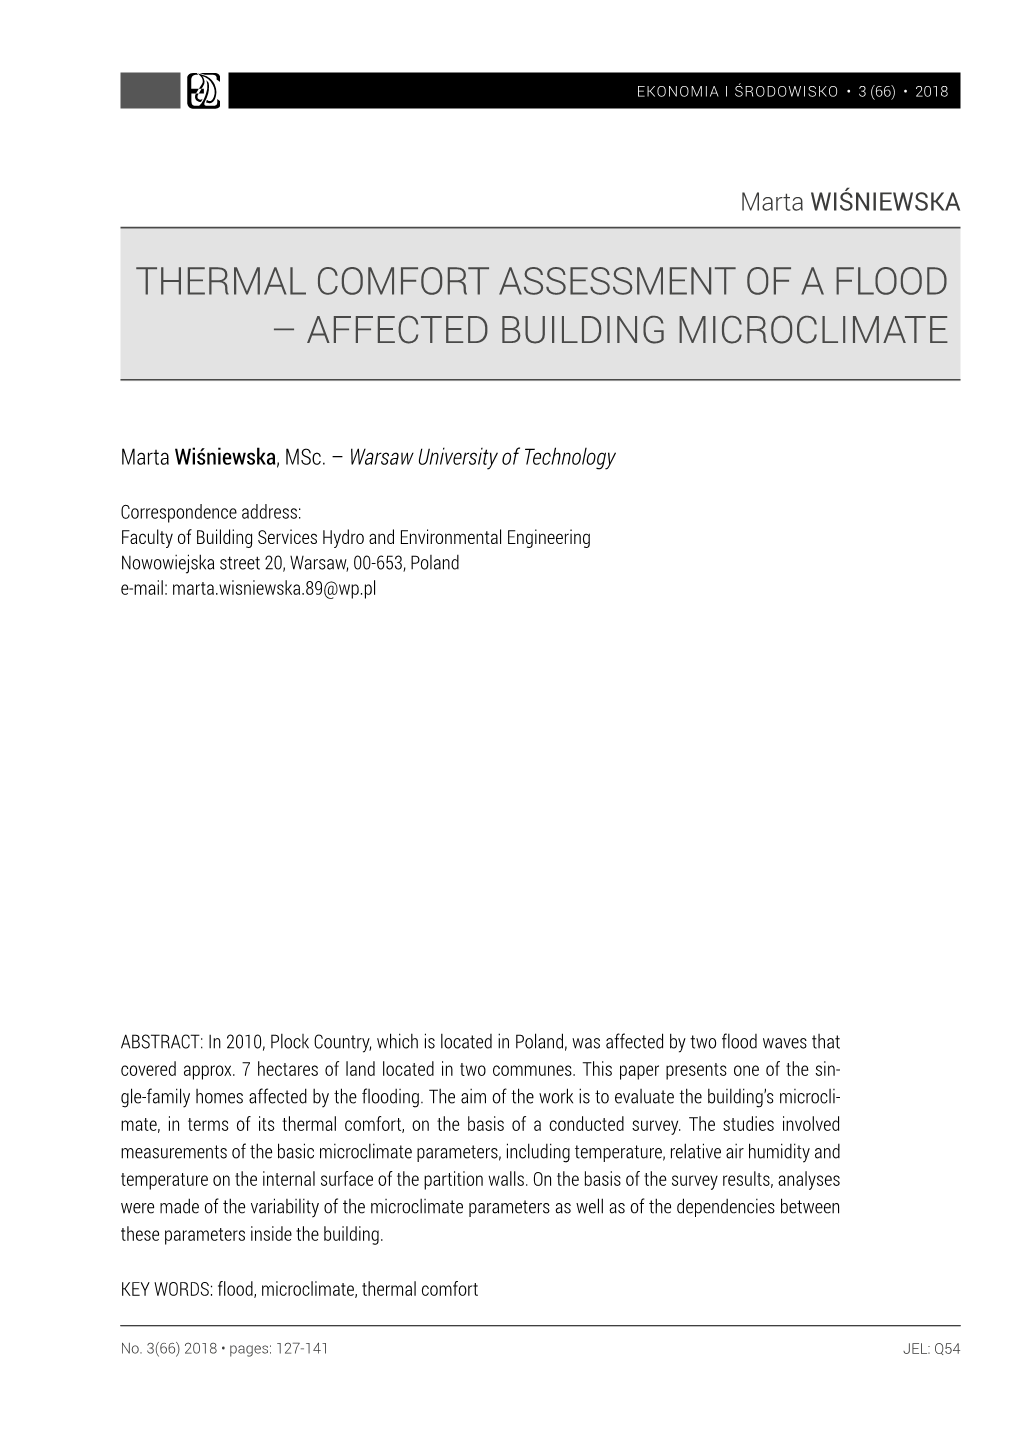 Thermal Comfort Assessment of a Flood – Affected Building Microclimate